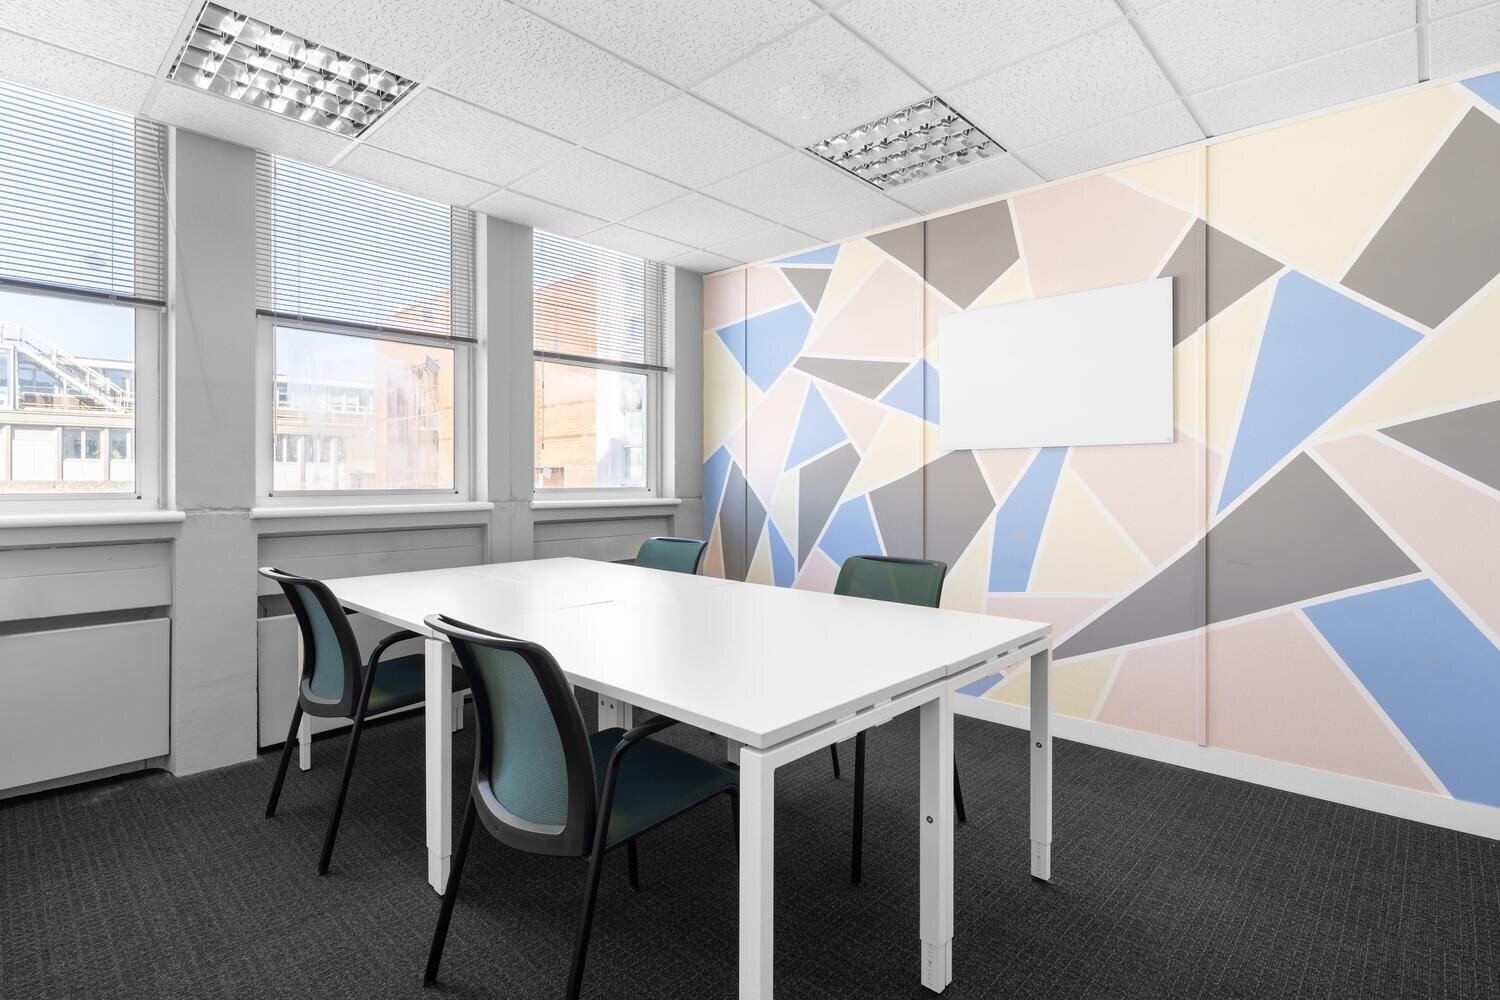 Serviced offices to let in Brighton